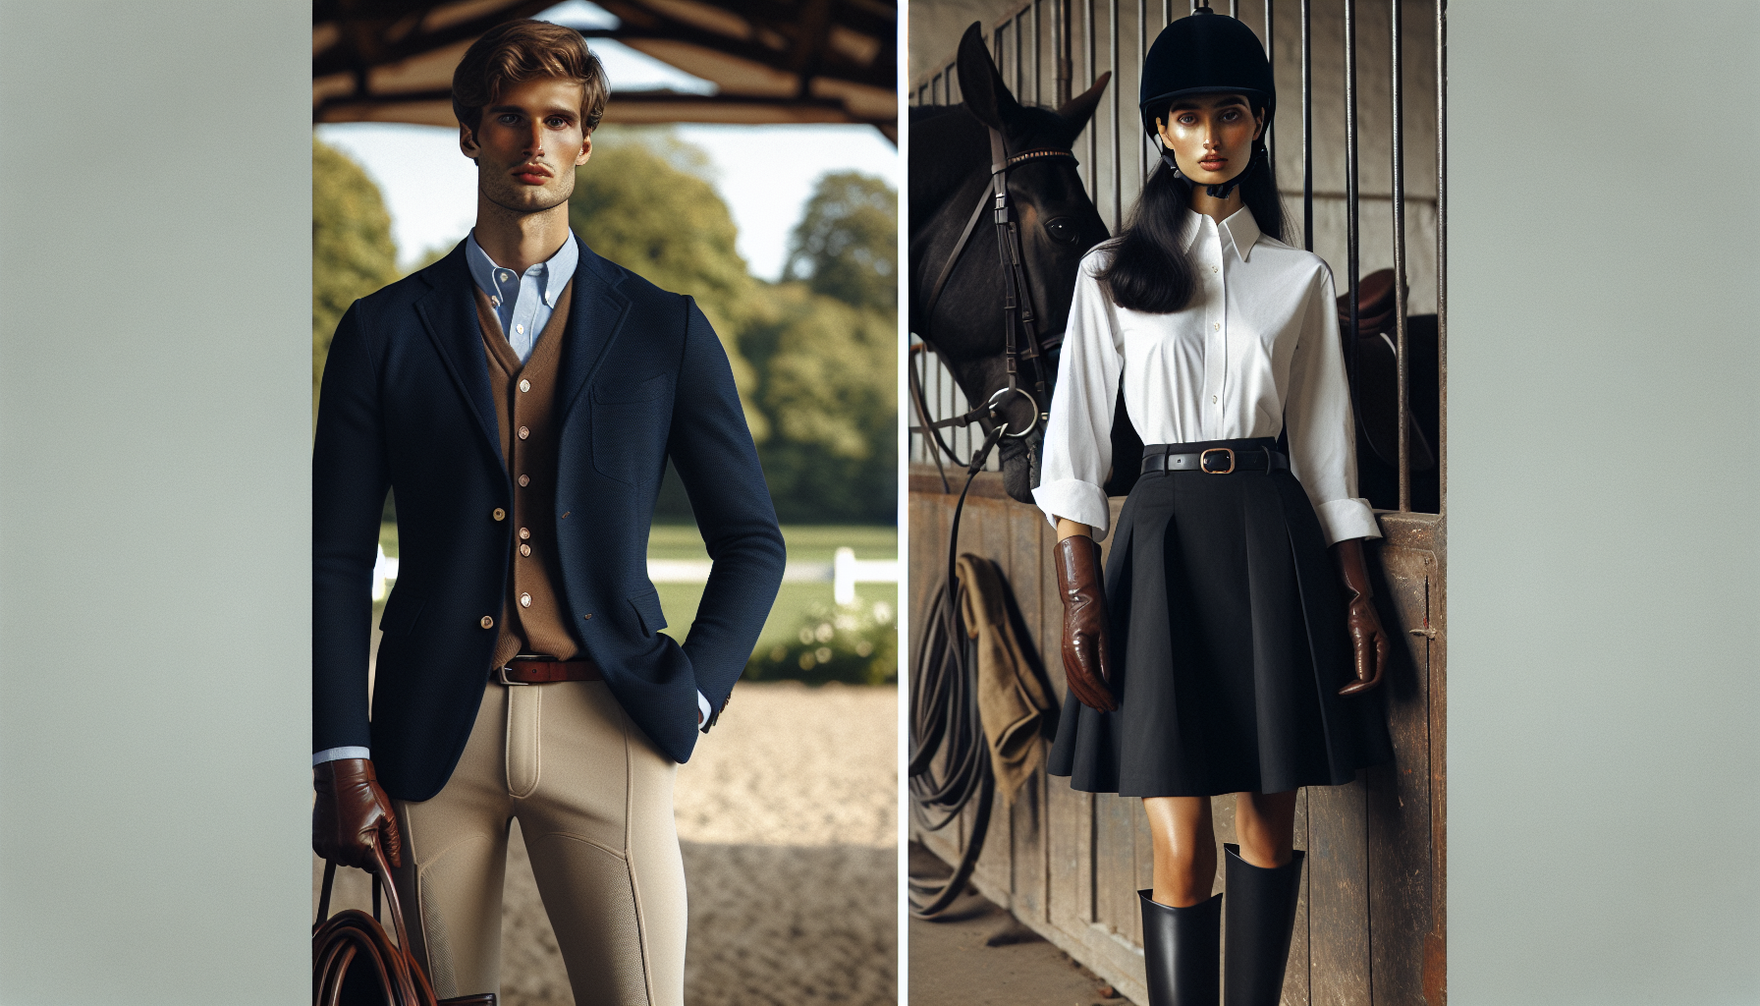 Generate an image showcasing the Equestrian Preppy Style. Imagine a Caucasian man wearing a nicely tailored navy blazer atop a classic button-down shirt paired with khaki pants. His feet are in brown 